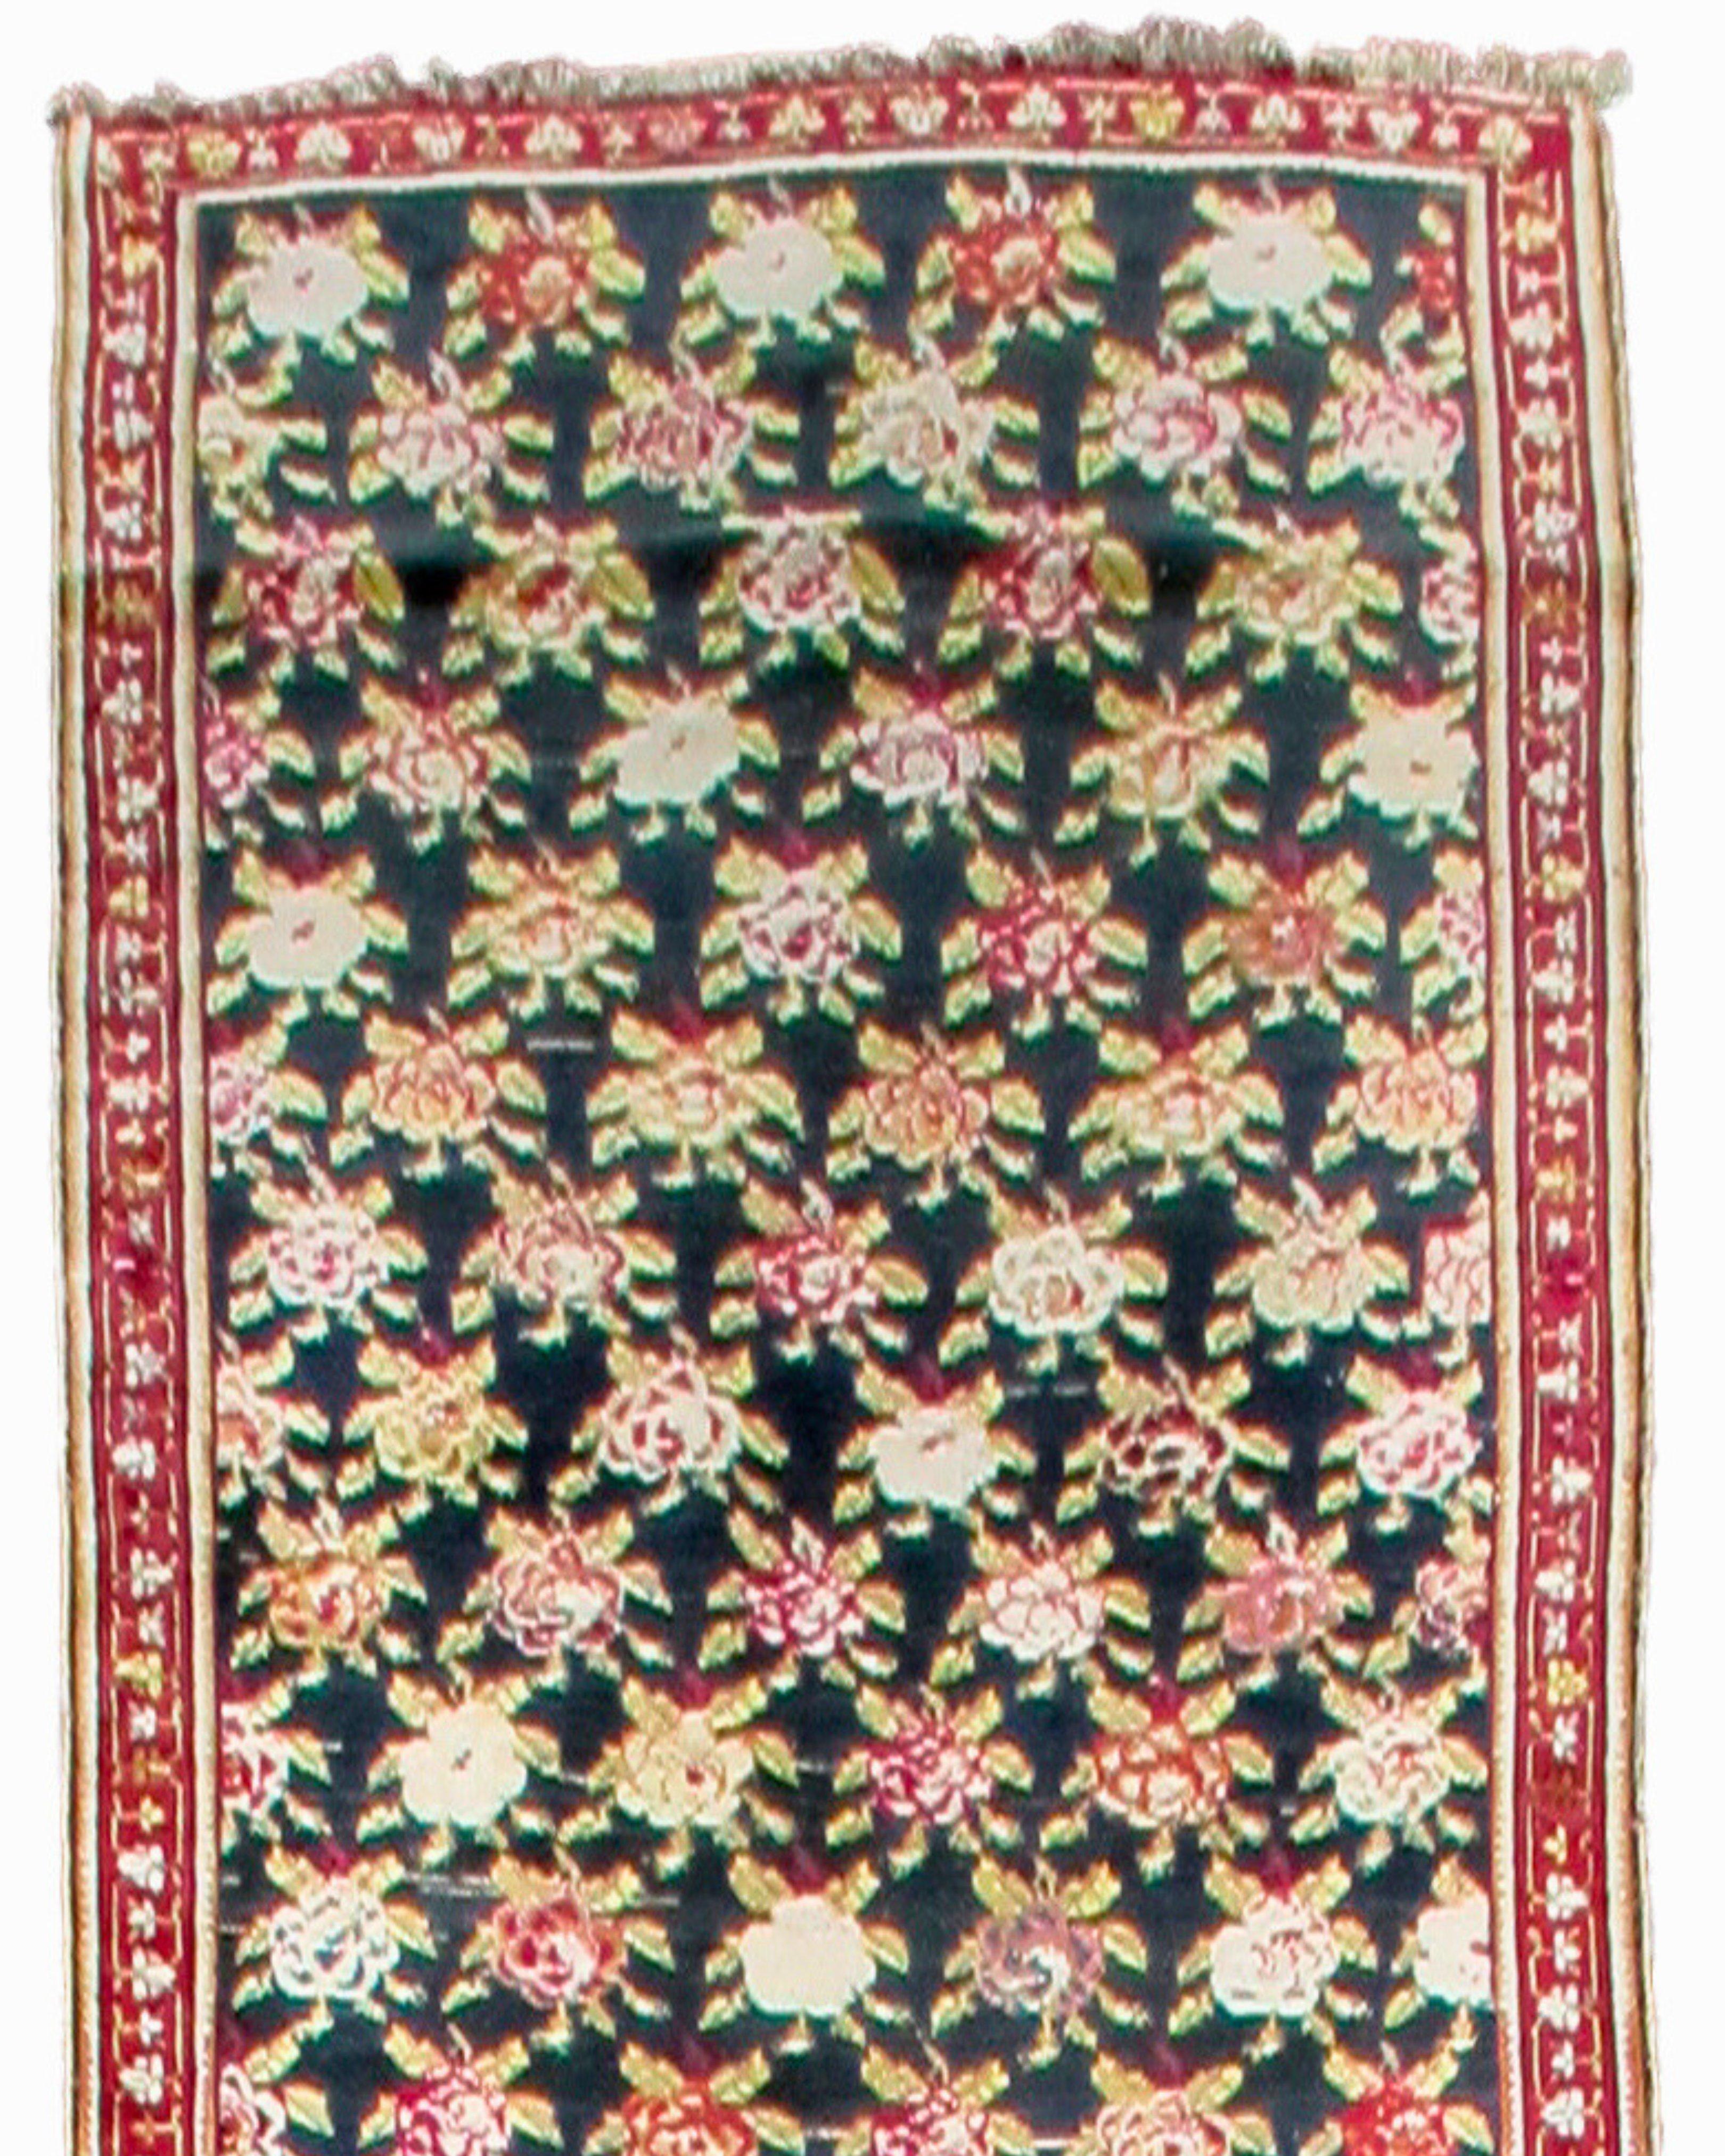 Antique Floral Caucasian Karabagh Long Runner Rug, 19th Century

Additional information:
Dimensions: 4'1